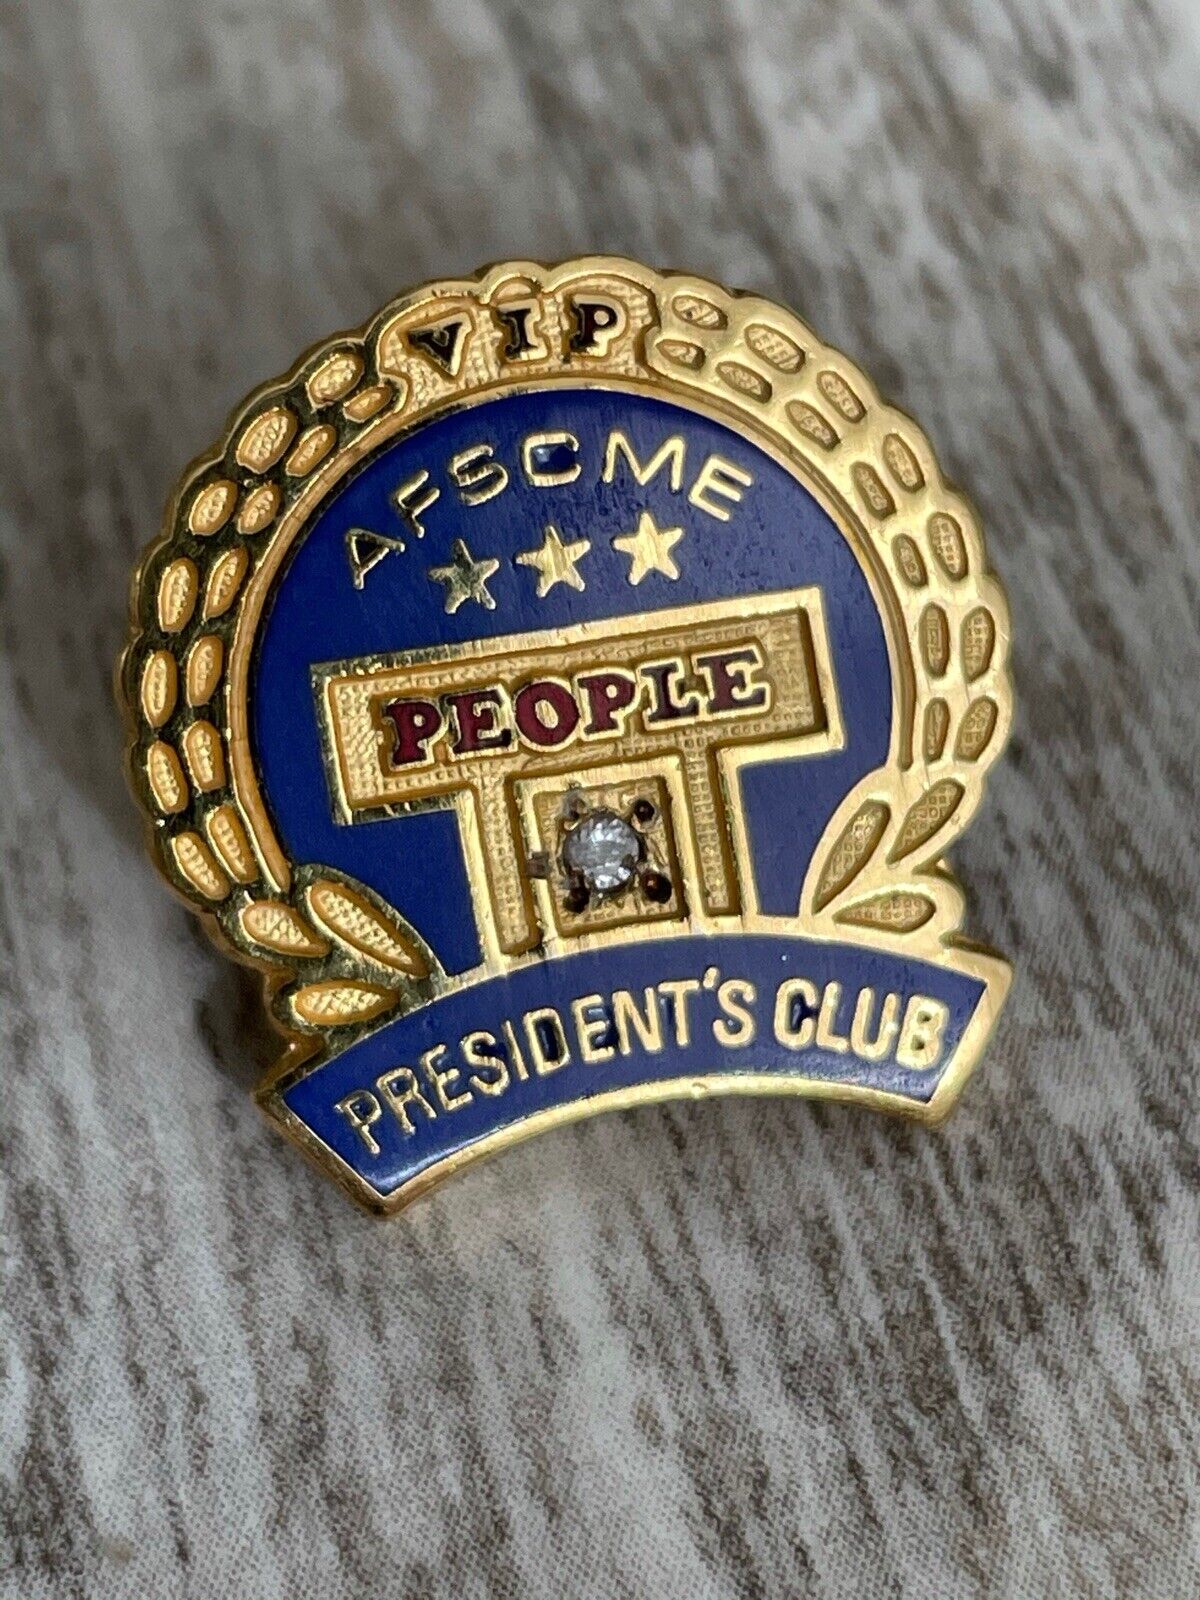 AFSCME VIP People Presidents Club Union 65 Made Inset Stone lapel pin